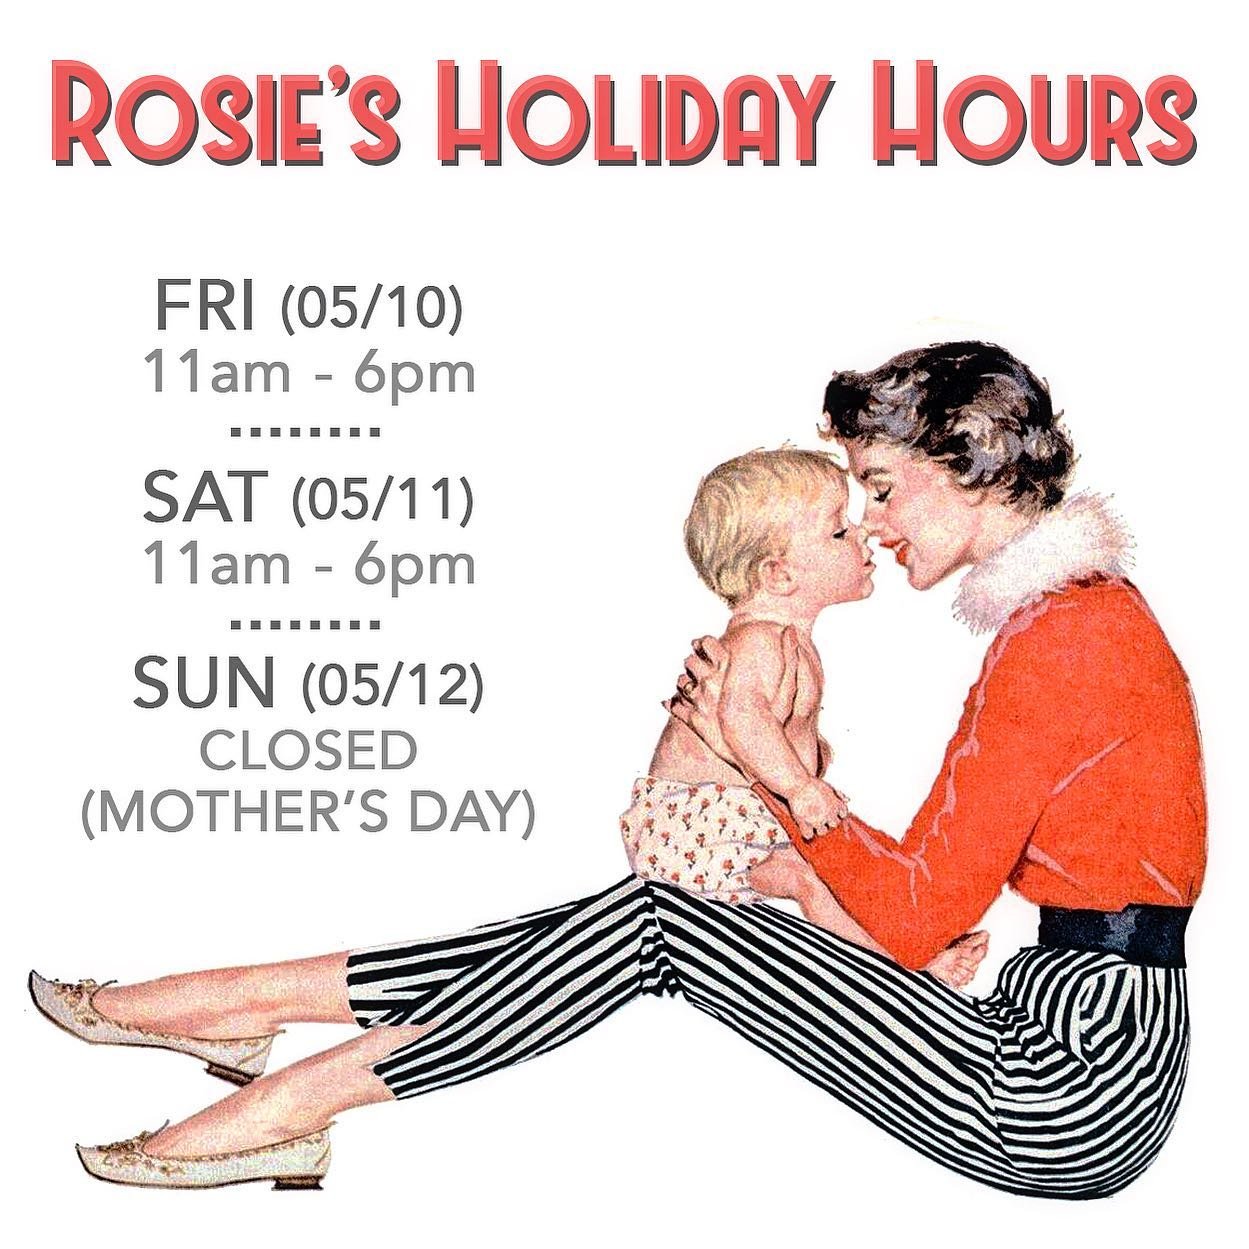 ✨Rosie&rsquo;s Vintage HOLIDAY HOURS✨
&bull; Friday May 10th
11am - 6pm
&bull; Saturday May 11th
11am - 6pm
&bull; Sunday May 12th
CLOSED (Mother&rsquo;s Day)
❤️🌹❤️🌹❤️🌹❤️